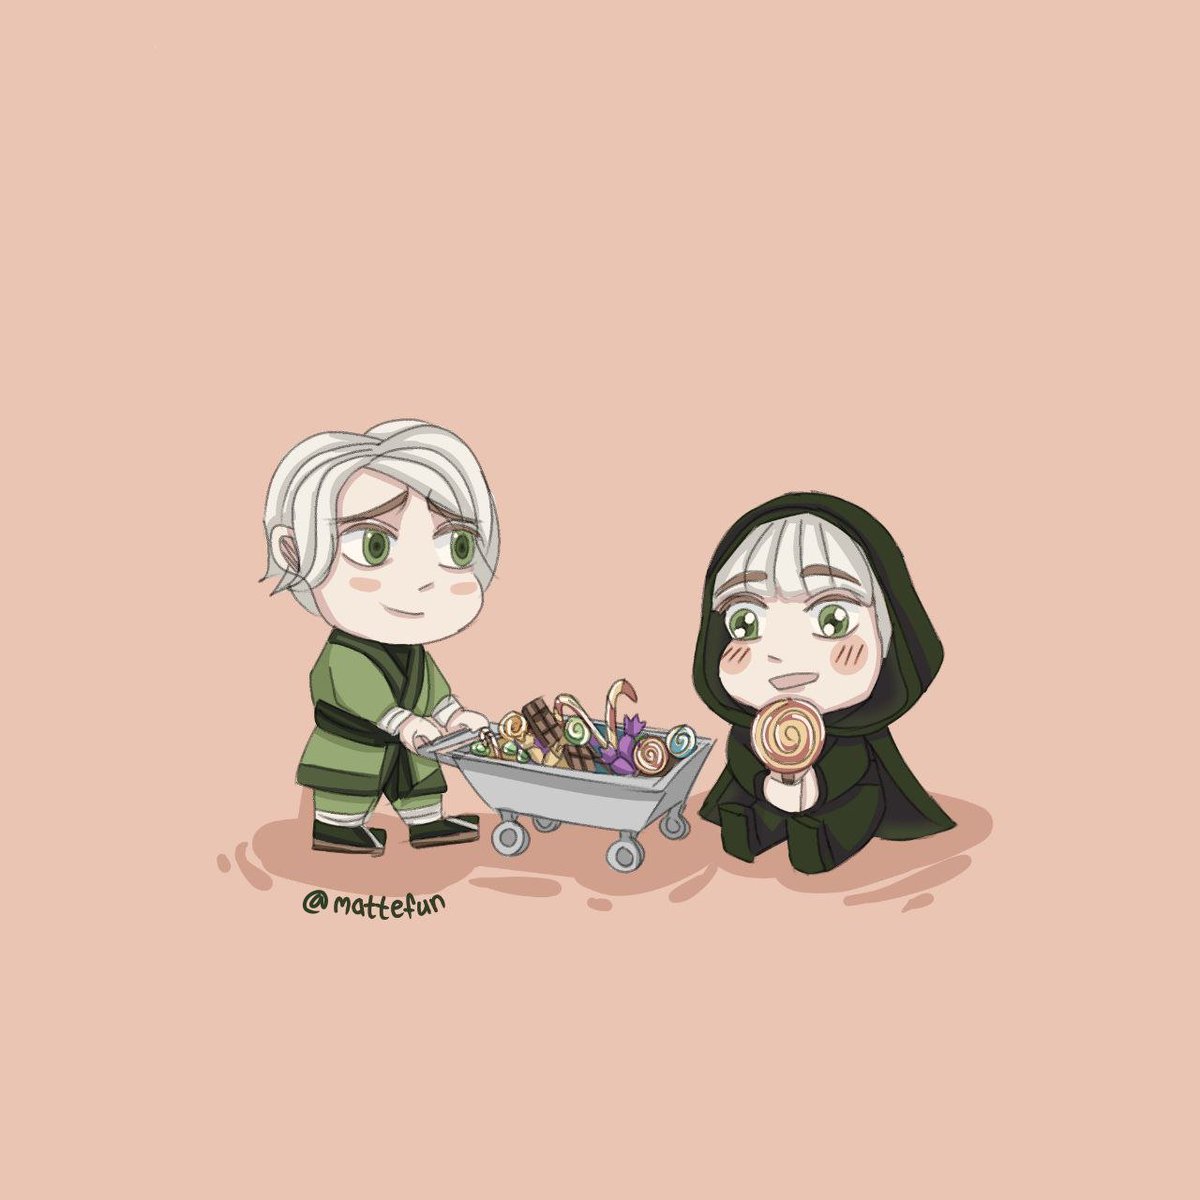 Meeting of different ages🥺🍭

#ninjago #lloyd